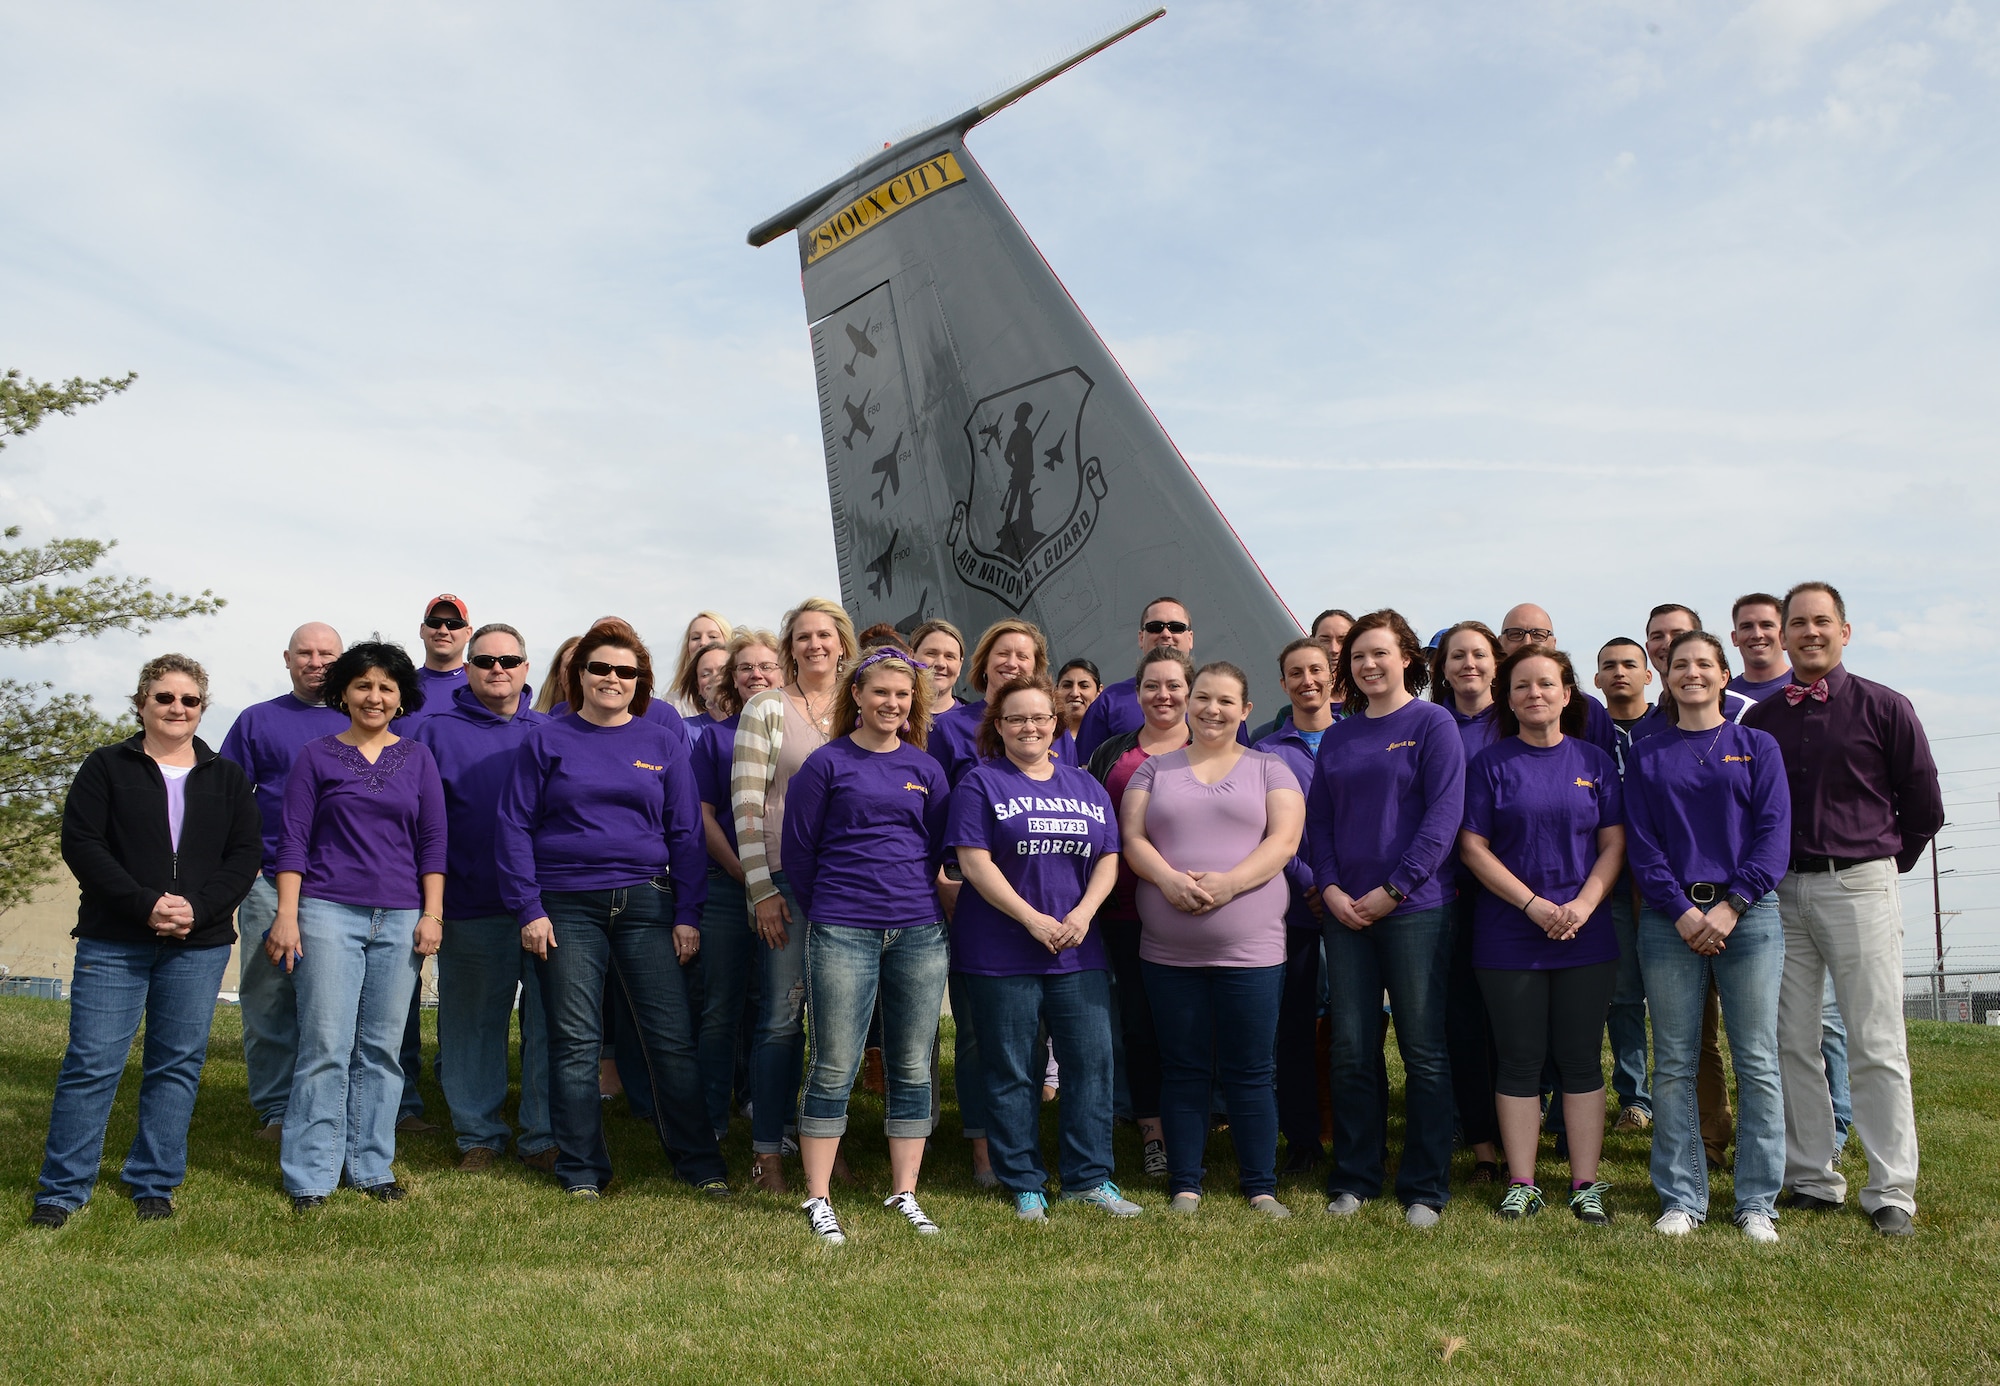 Members of the 185th Air Refueling Wing, Iowa Air National Guard, pose for a group photo wearing purple in a show of support for military kids as part of national “Purple up Day” at the Air National Guard base in Sioux City, Iowa on April 15, 2016. 
(Iowa Air National Guard Photo by: Master Sgt. Vincent De Groot/Released)